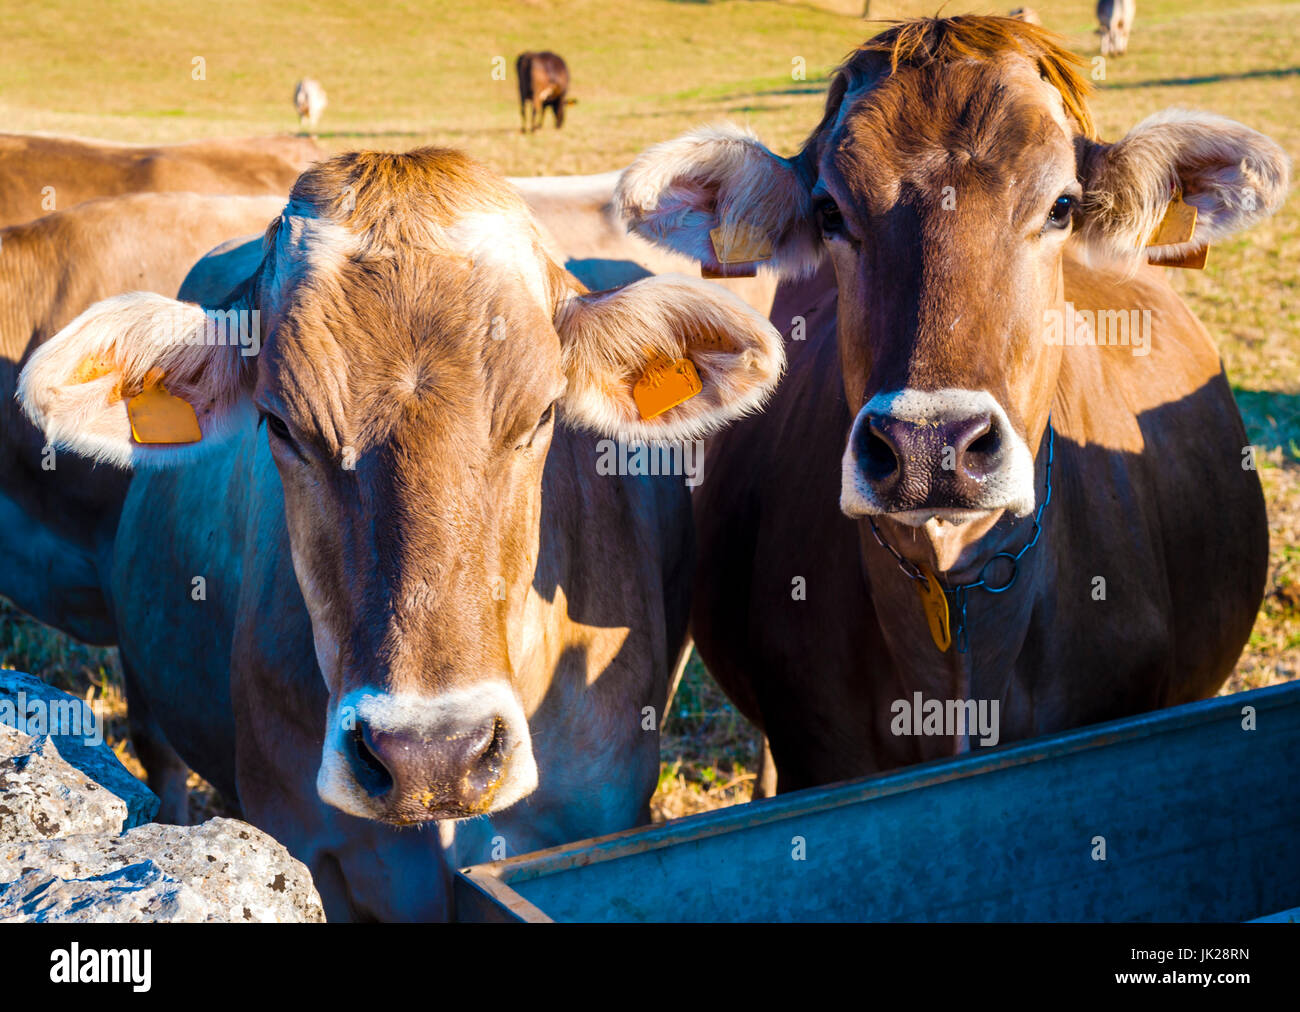 Cows in a meadow, apulia countryside landscape Stock Photo